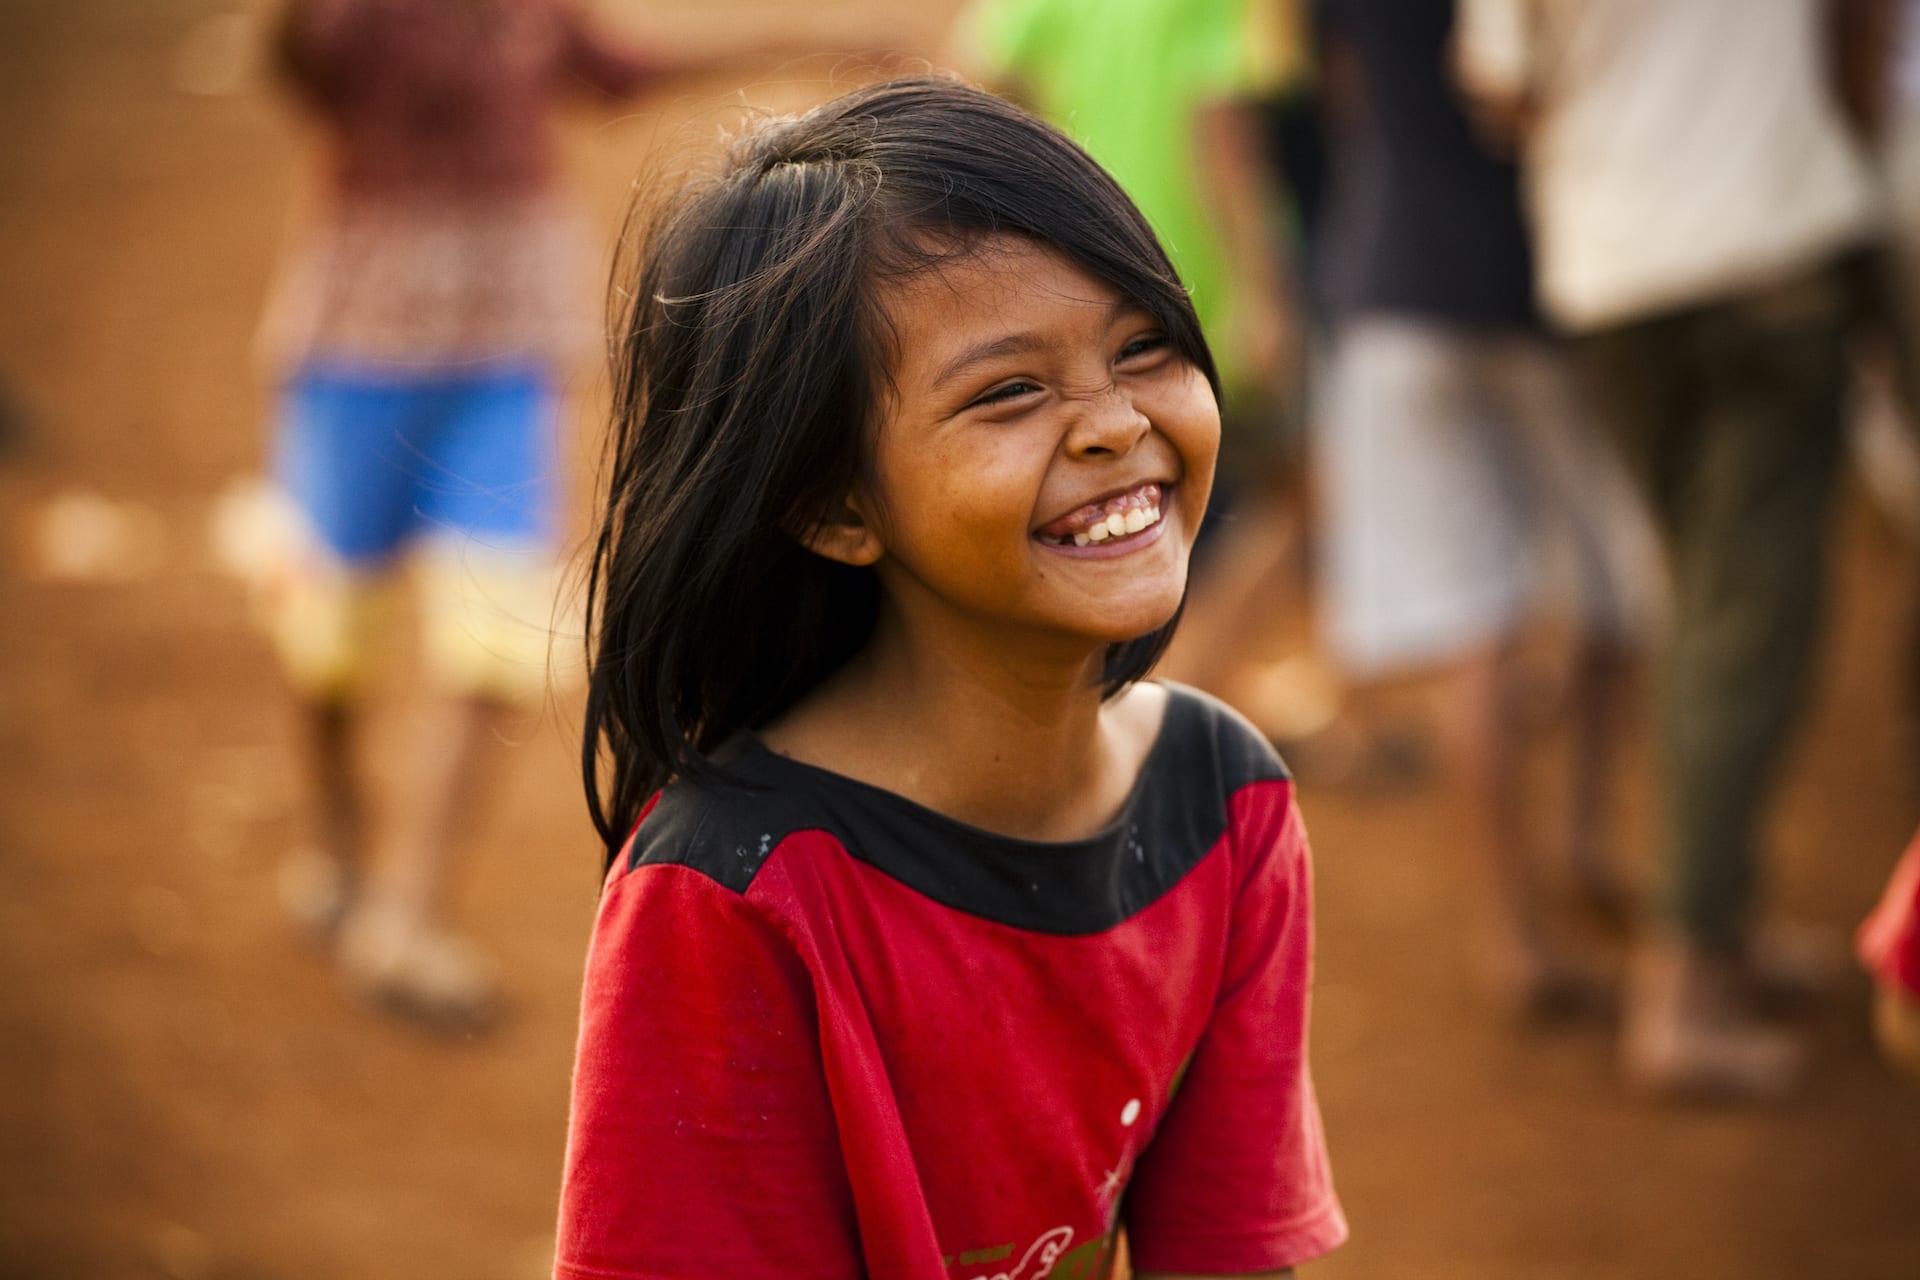 A young girl in a red shirt, laughing.